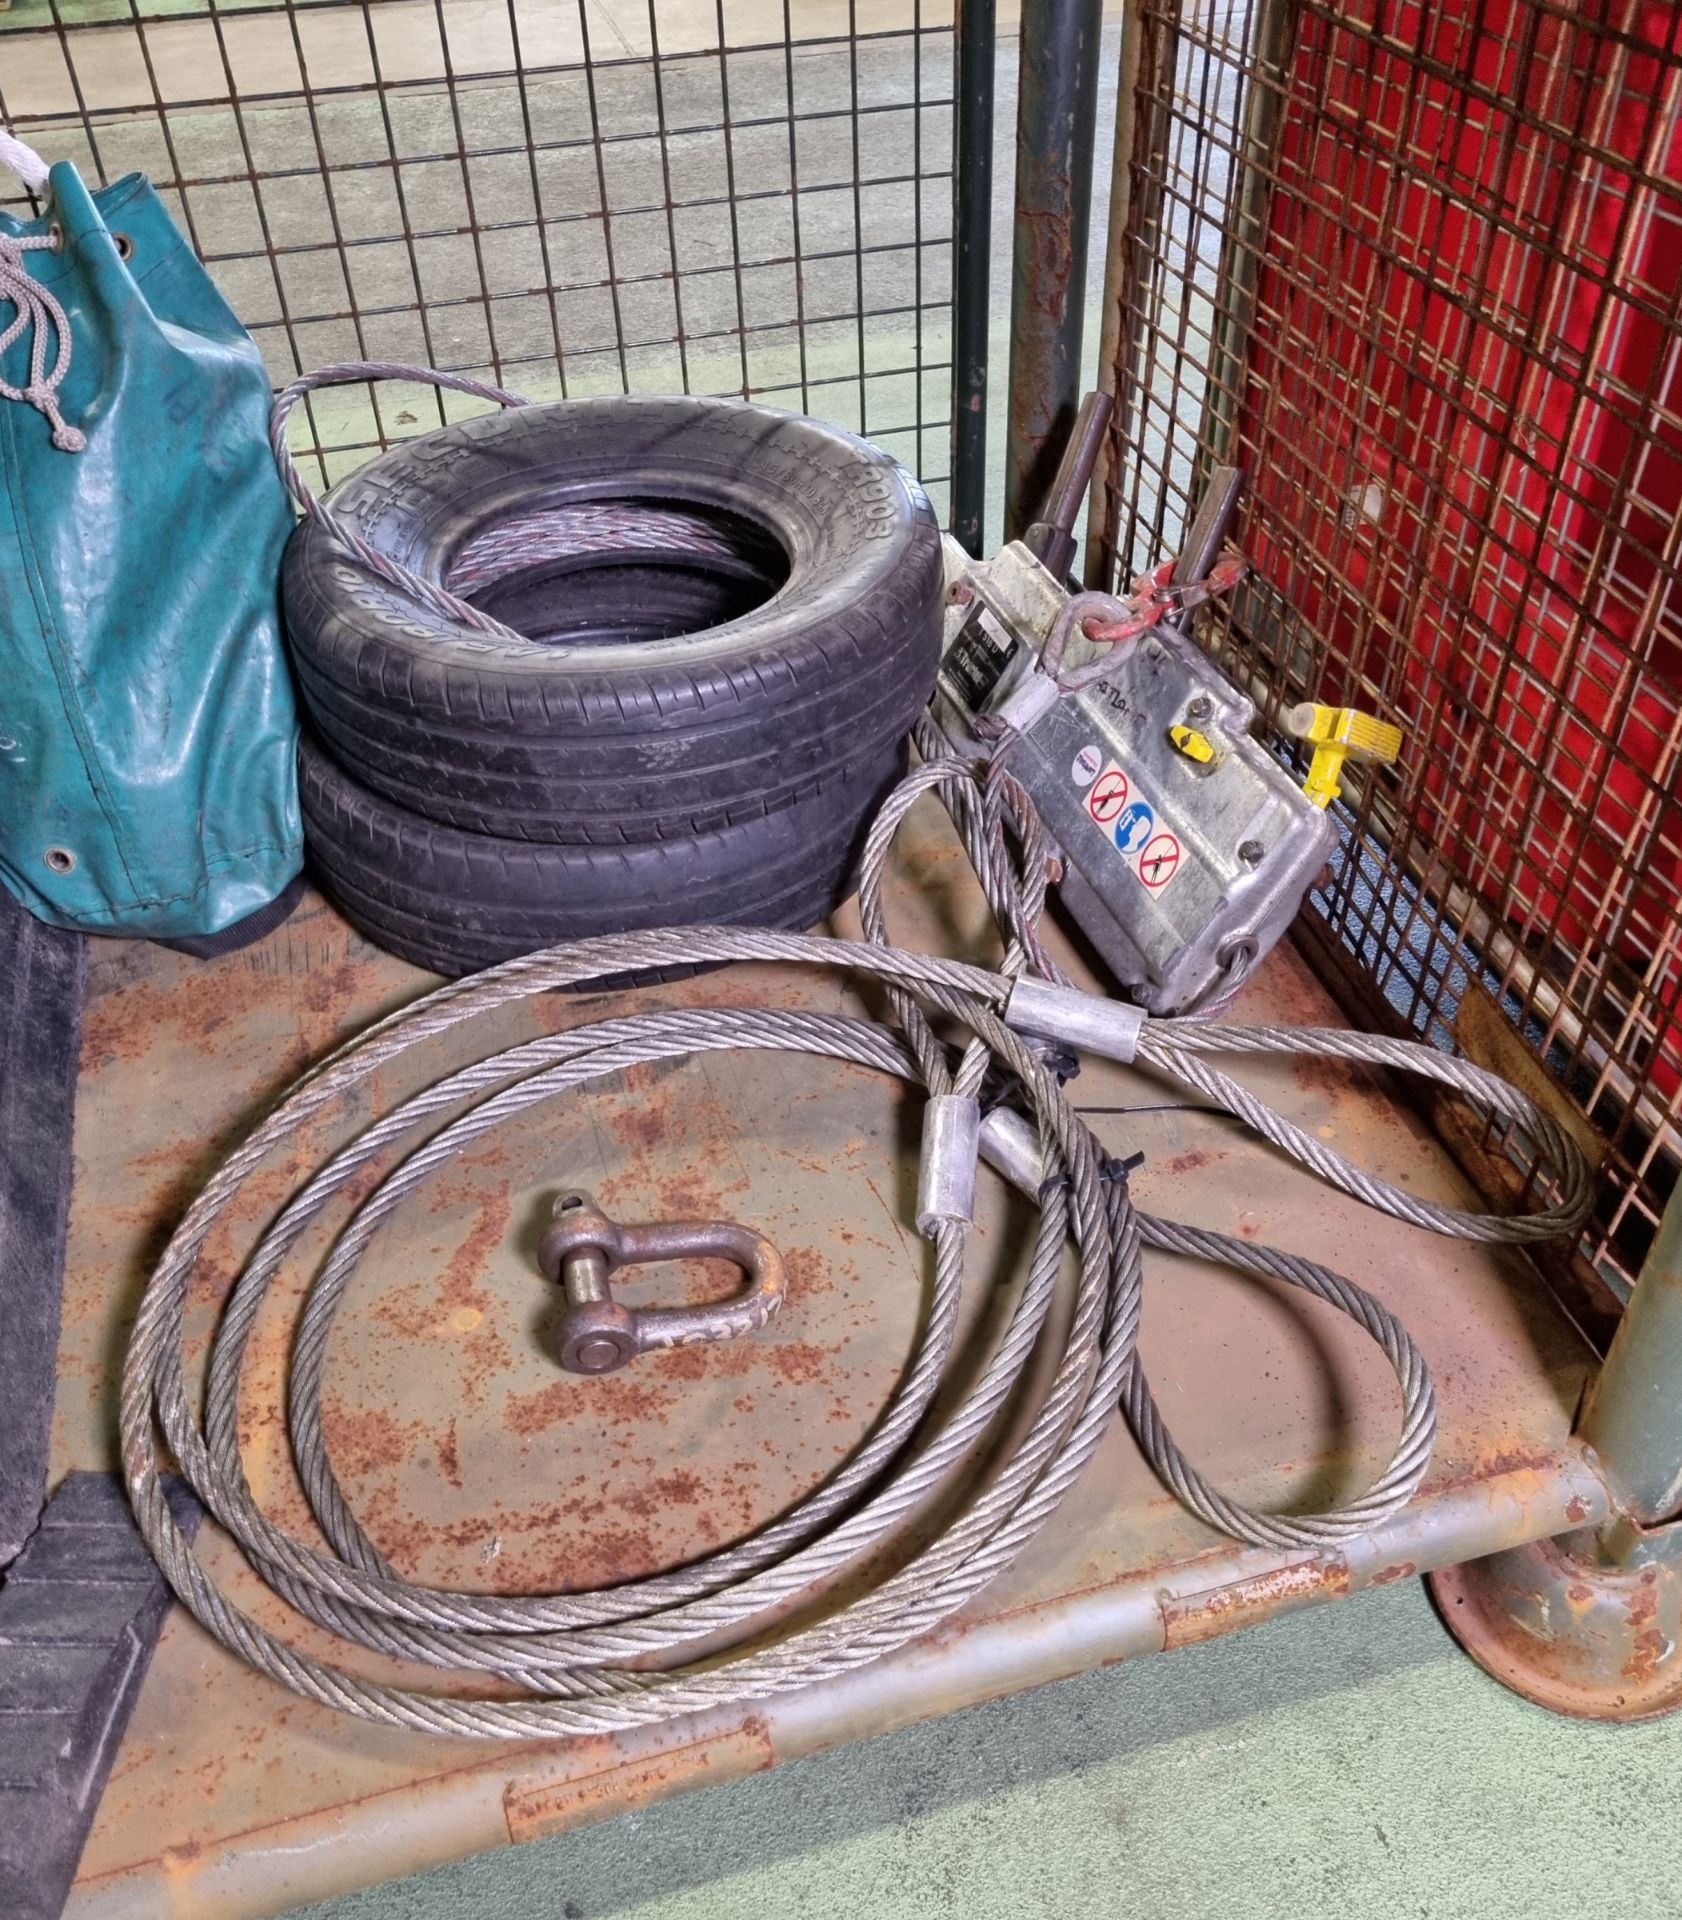 Lifting equipment - Tractel Tirfor T516 winch, wire rope slings, lifting blocks, chocks & more - Image 3 of 6